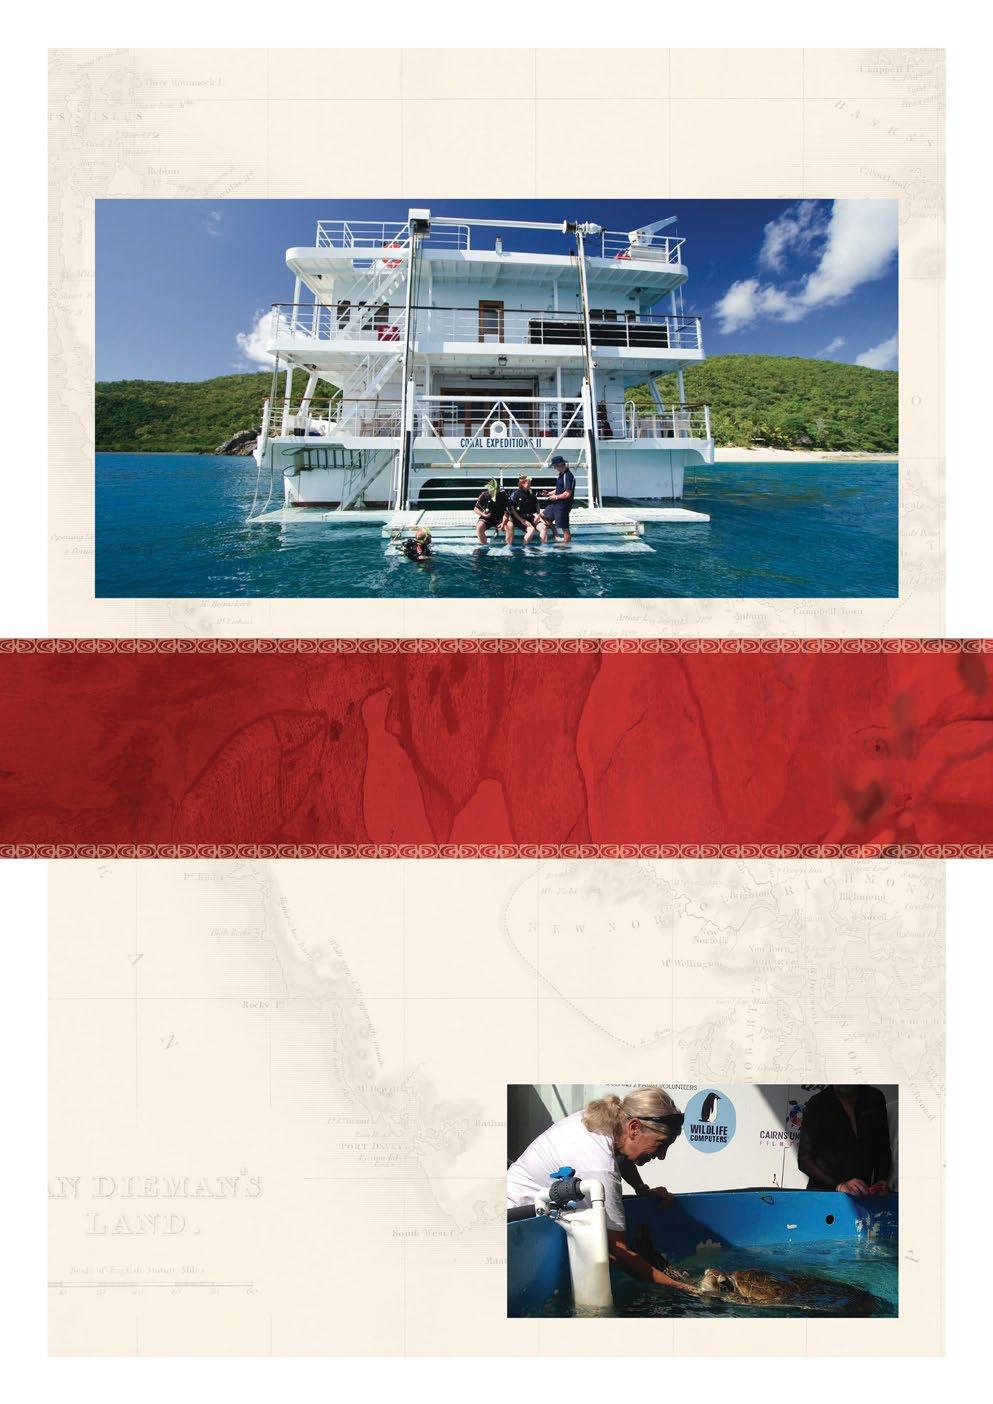 3 NIGHT SOUTHERN DAY 4 19.12.16 LOCATION: FITZROY ISLAND CAIRNS Wind 5-10 knots Seas 0.